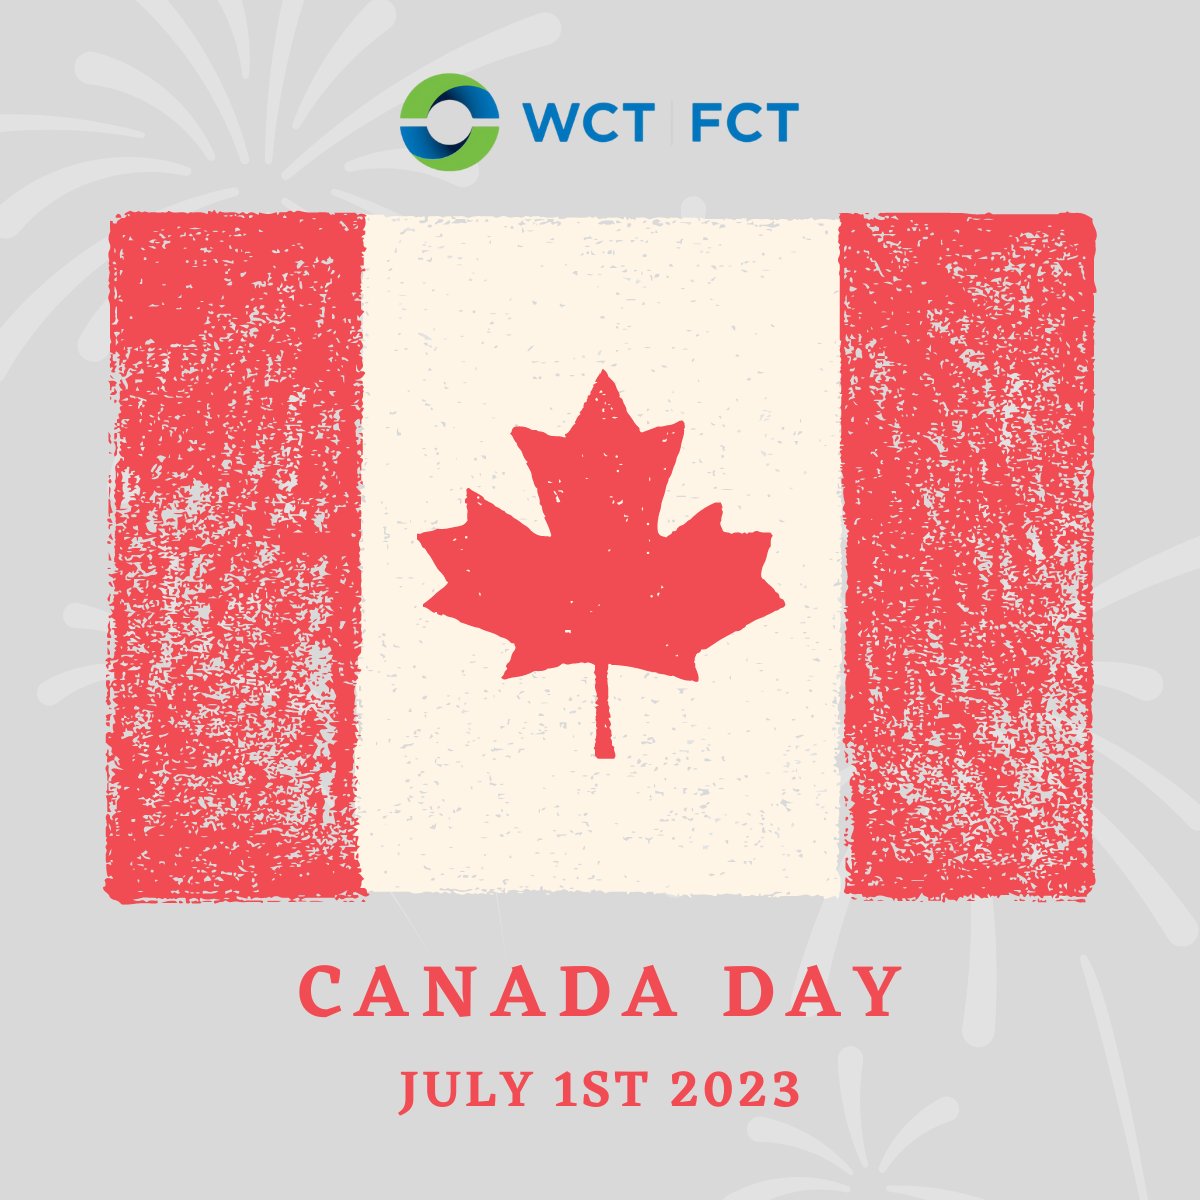 Happy Canada Day 2023 from WCT! Today, we celebrate the rich heritage and diverse cultures that shape this nation. Together, we can build a Canada that respects and uplifts all voices, embracing inclusivity, equality, and anti-colonial practices.